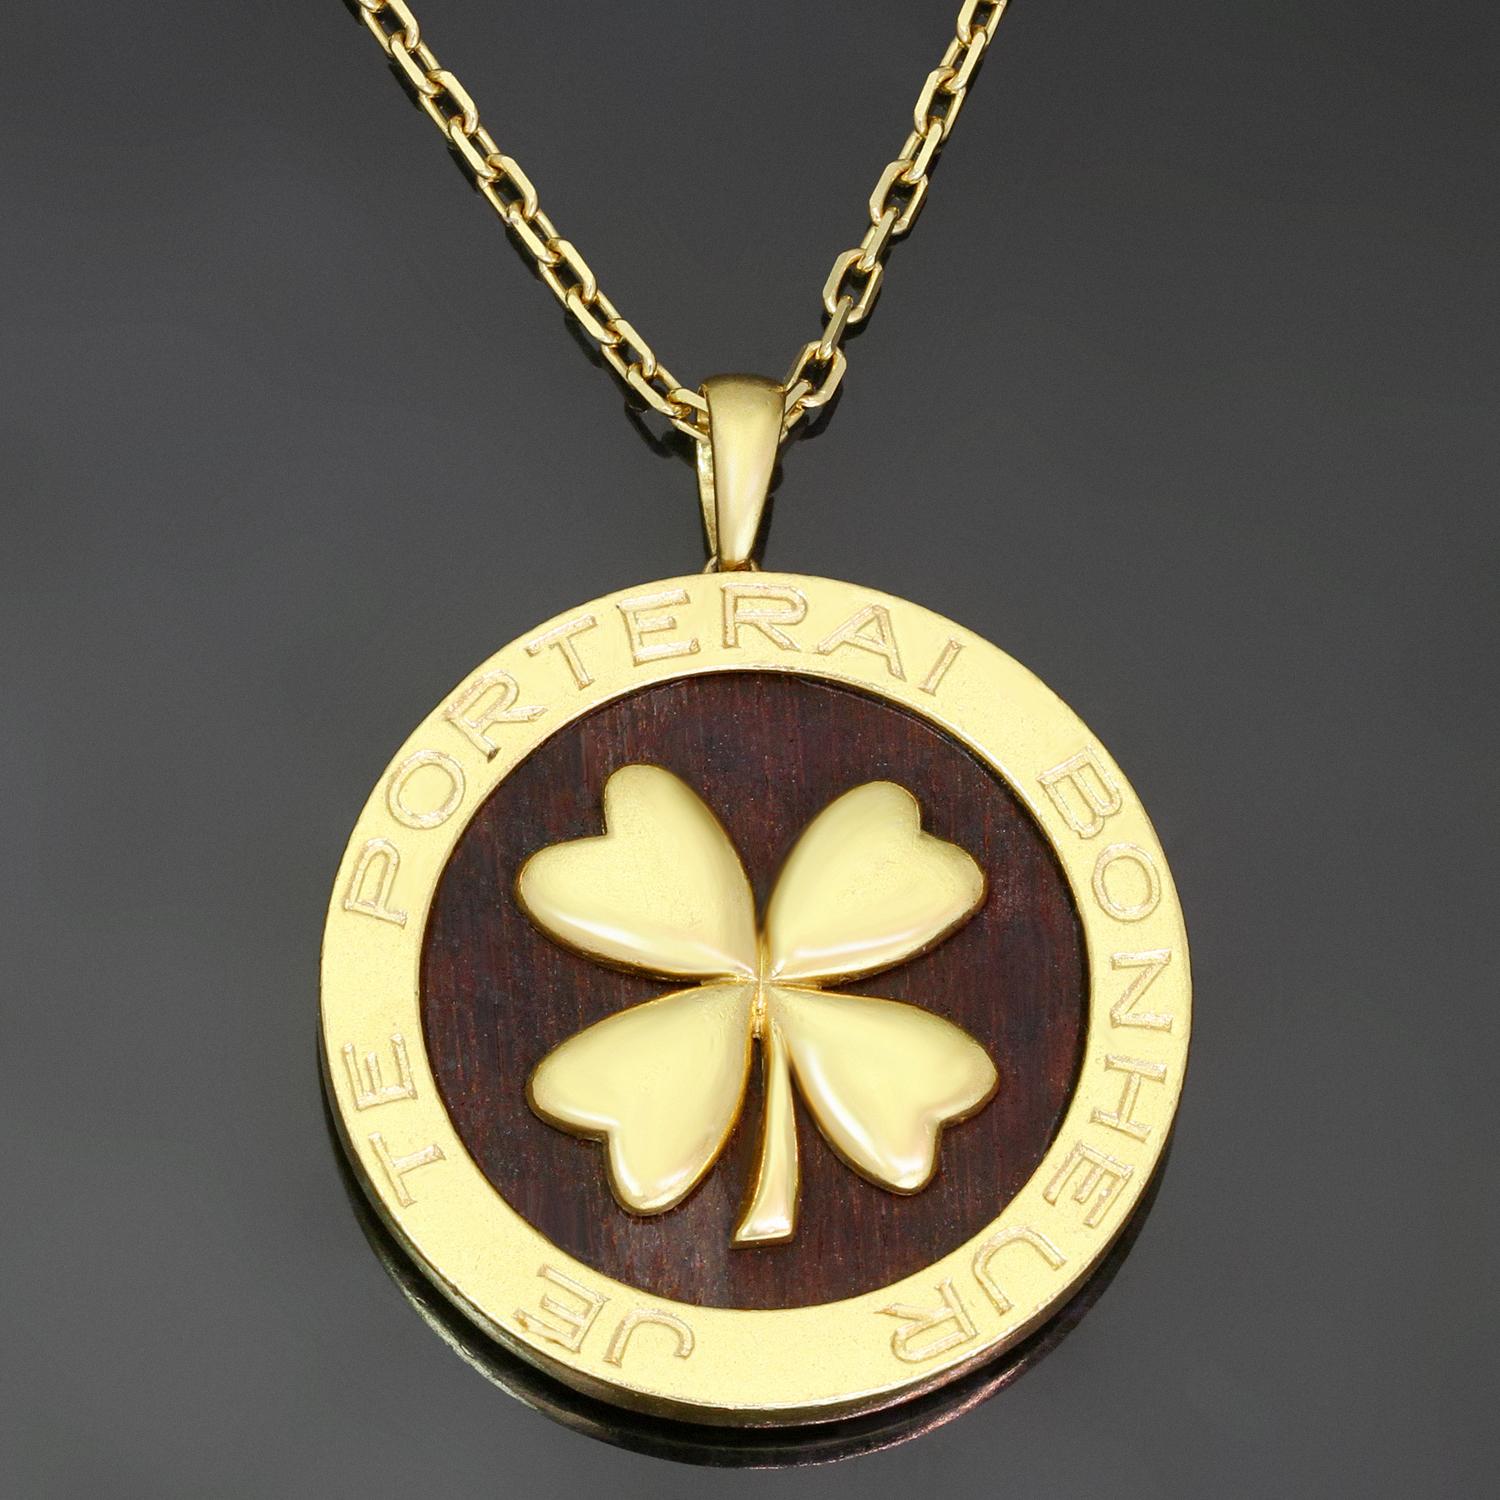 This rare Van Cleef & Arpels necklace is crafted in 18k yellow gold and features a round wooden bois d'amourette pendant accented with a four-leaf lucky clover and encircled with a text 'Je Te Porterai Bonheur' for 'I Will Bring You Luck'. Signed